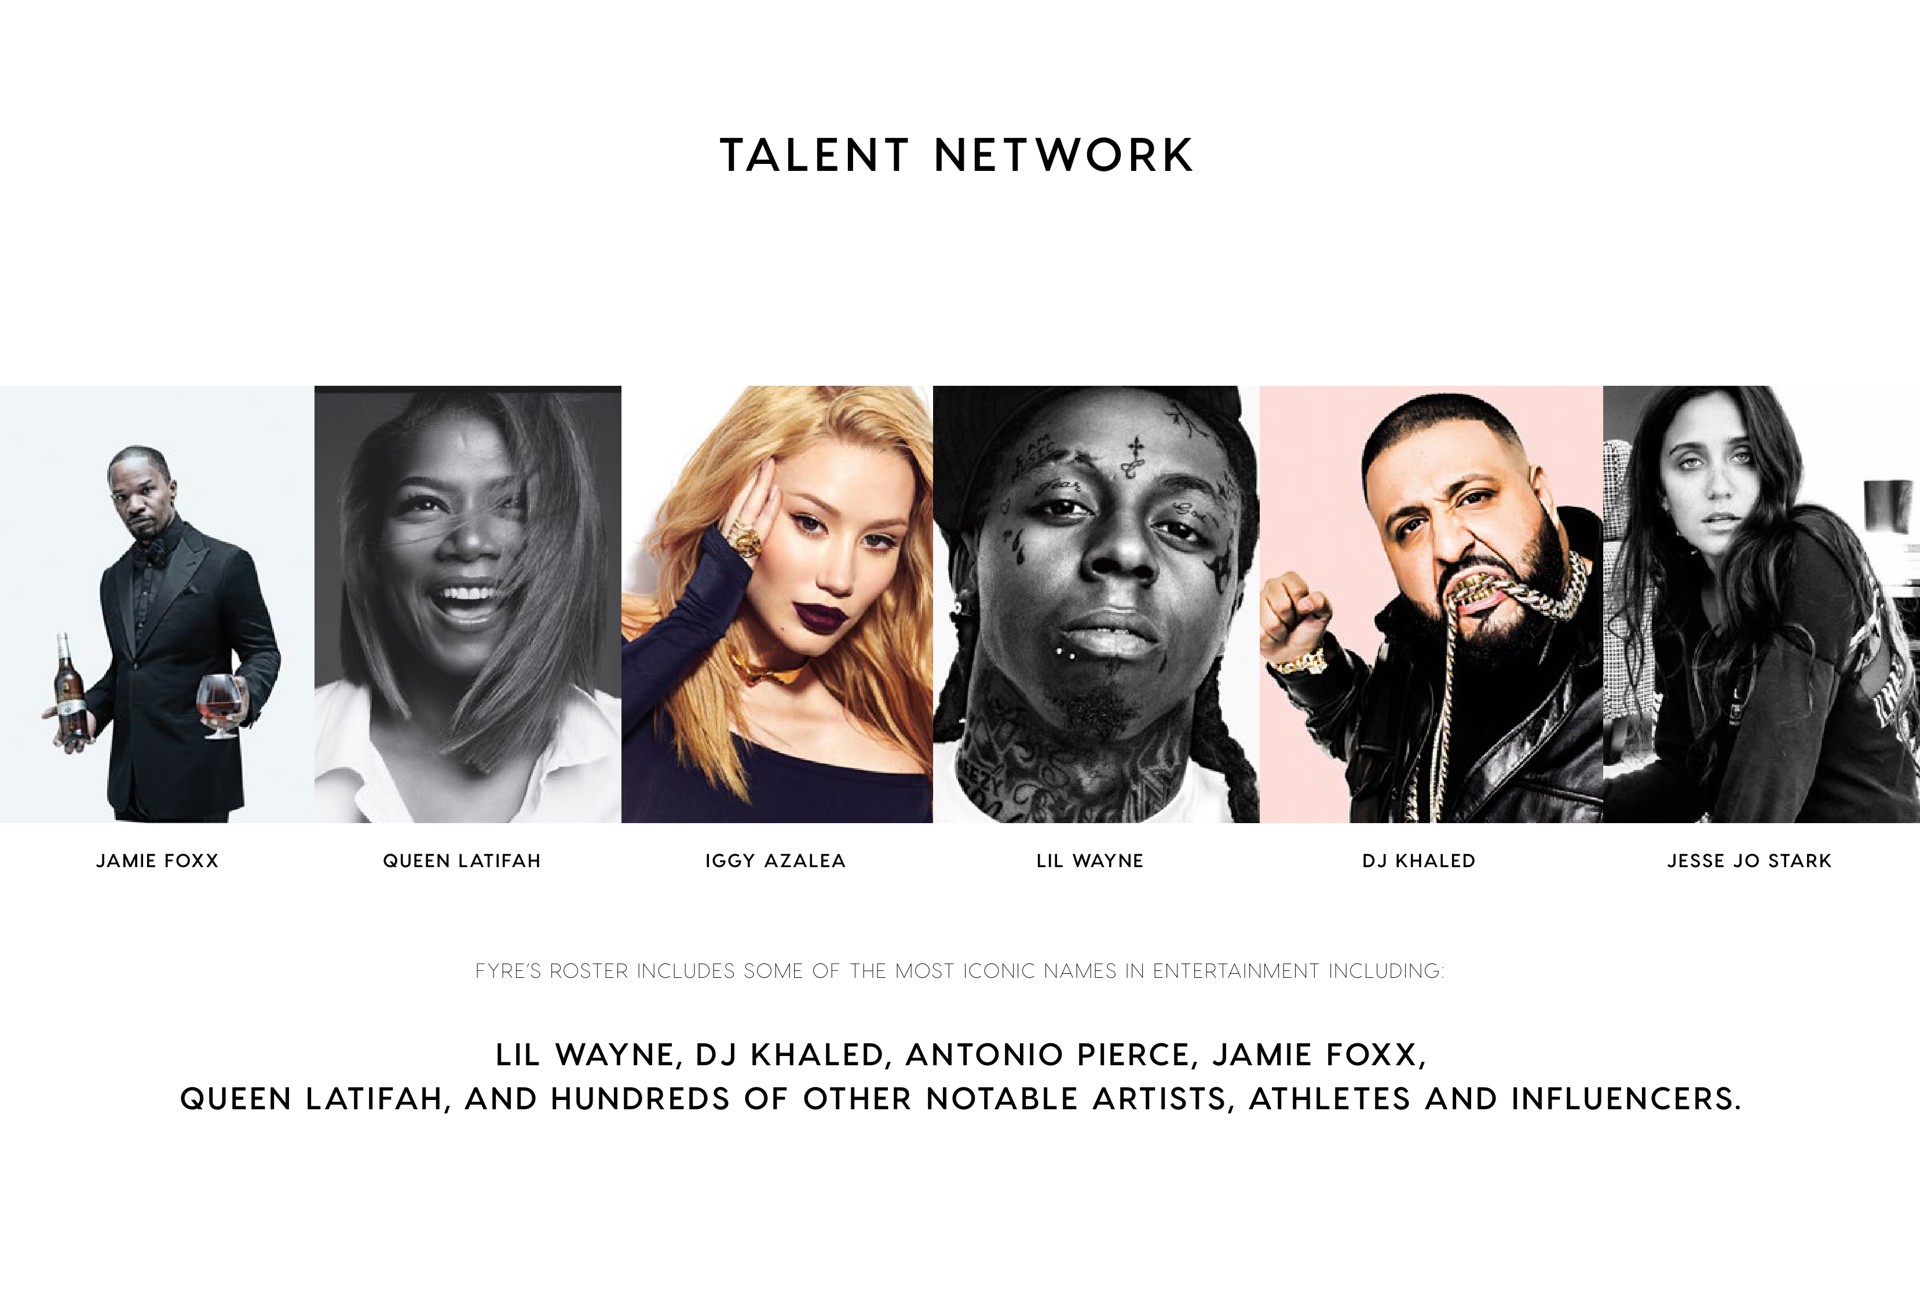 pierce queen and hundreds of other notable artists athletes and talent network | Fyre